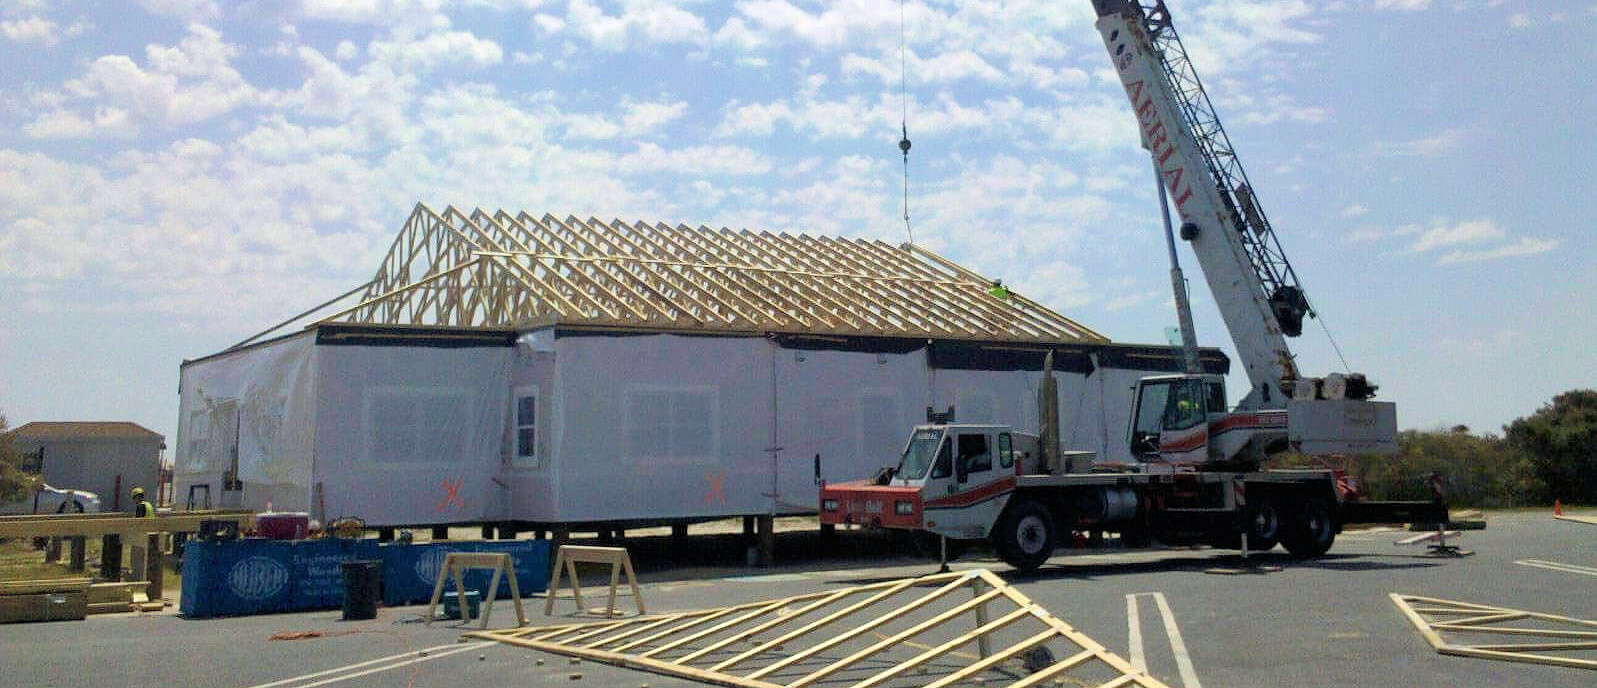 Temporary Construction Office Trailers